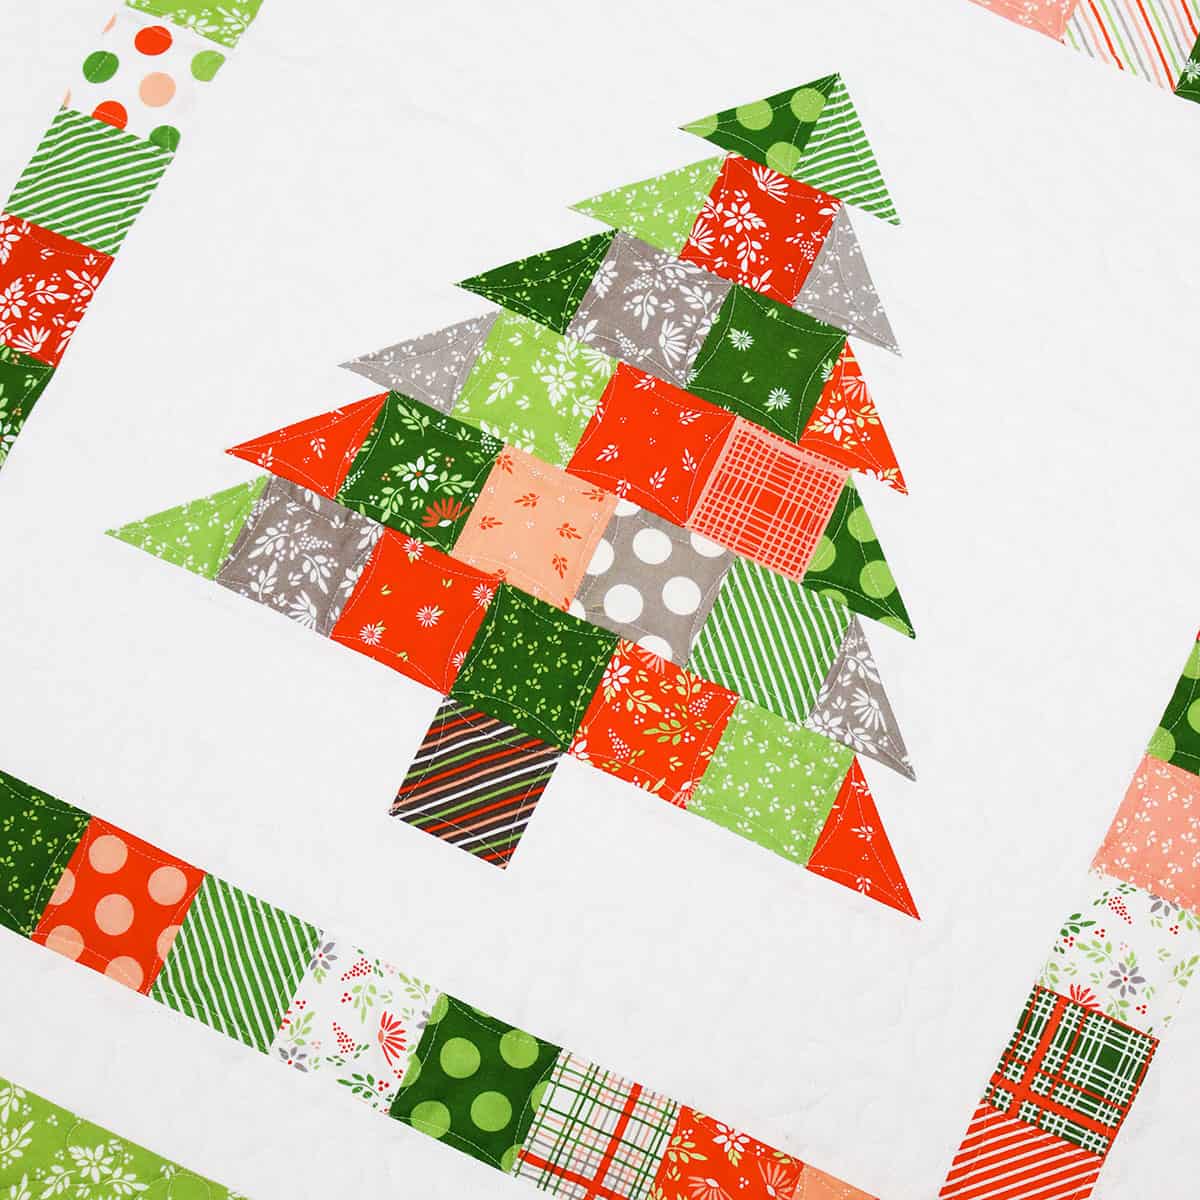 Christmas Tree quilted wall hanging in Favorite Things fabrics by Sherri & Chelsi for Moda